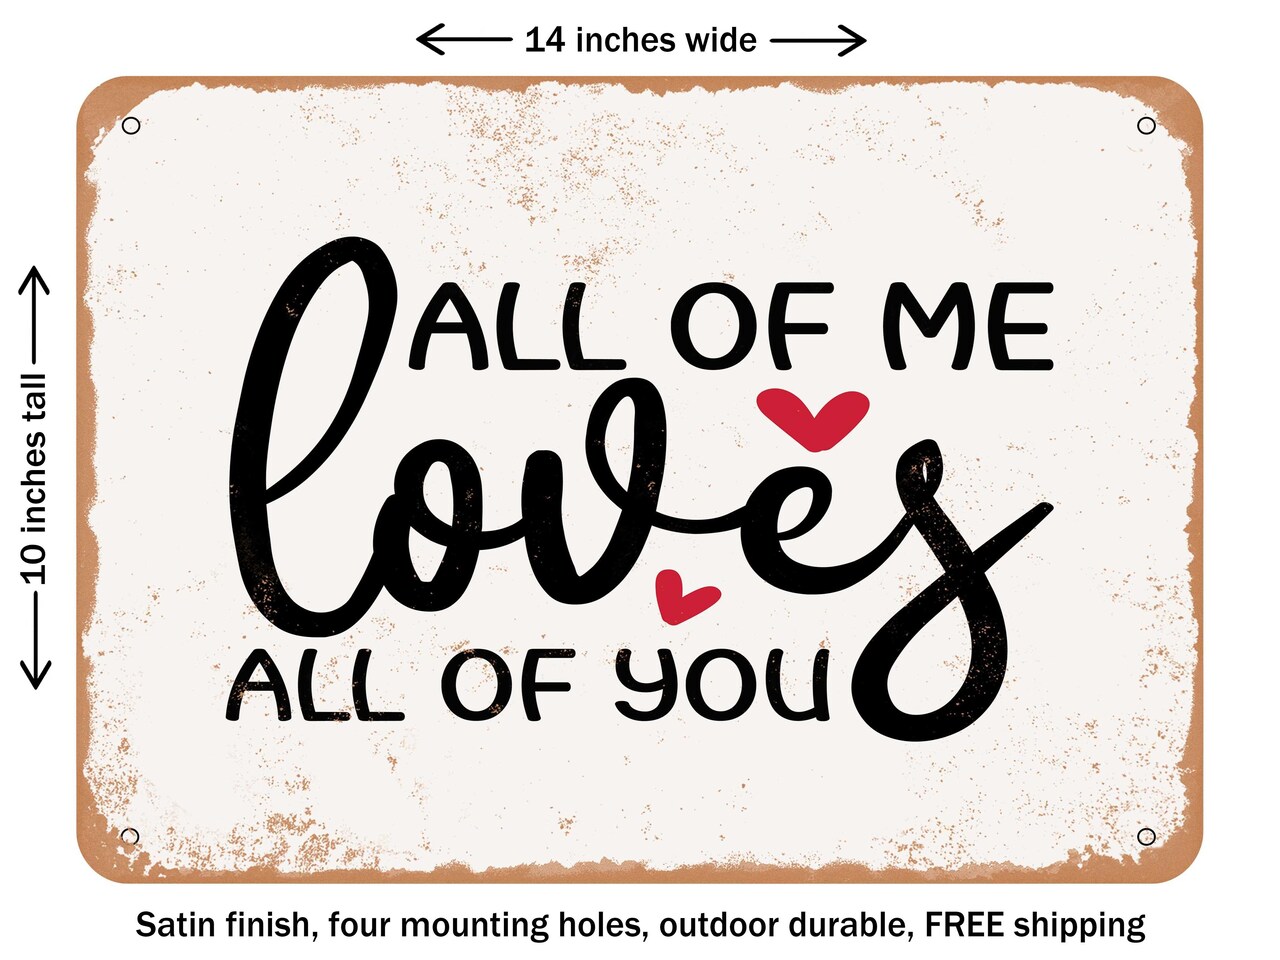 DECORATIVE METAL SIGN - All of Me Loves All of You - 3 - Vintage Rusty Look